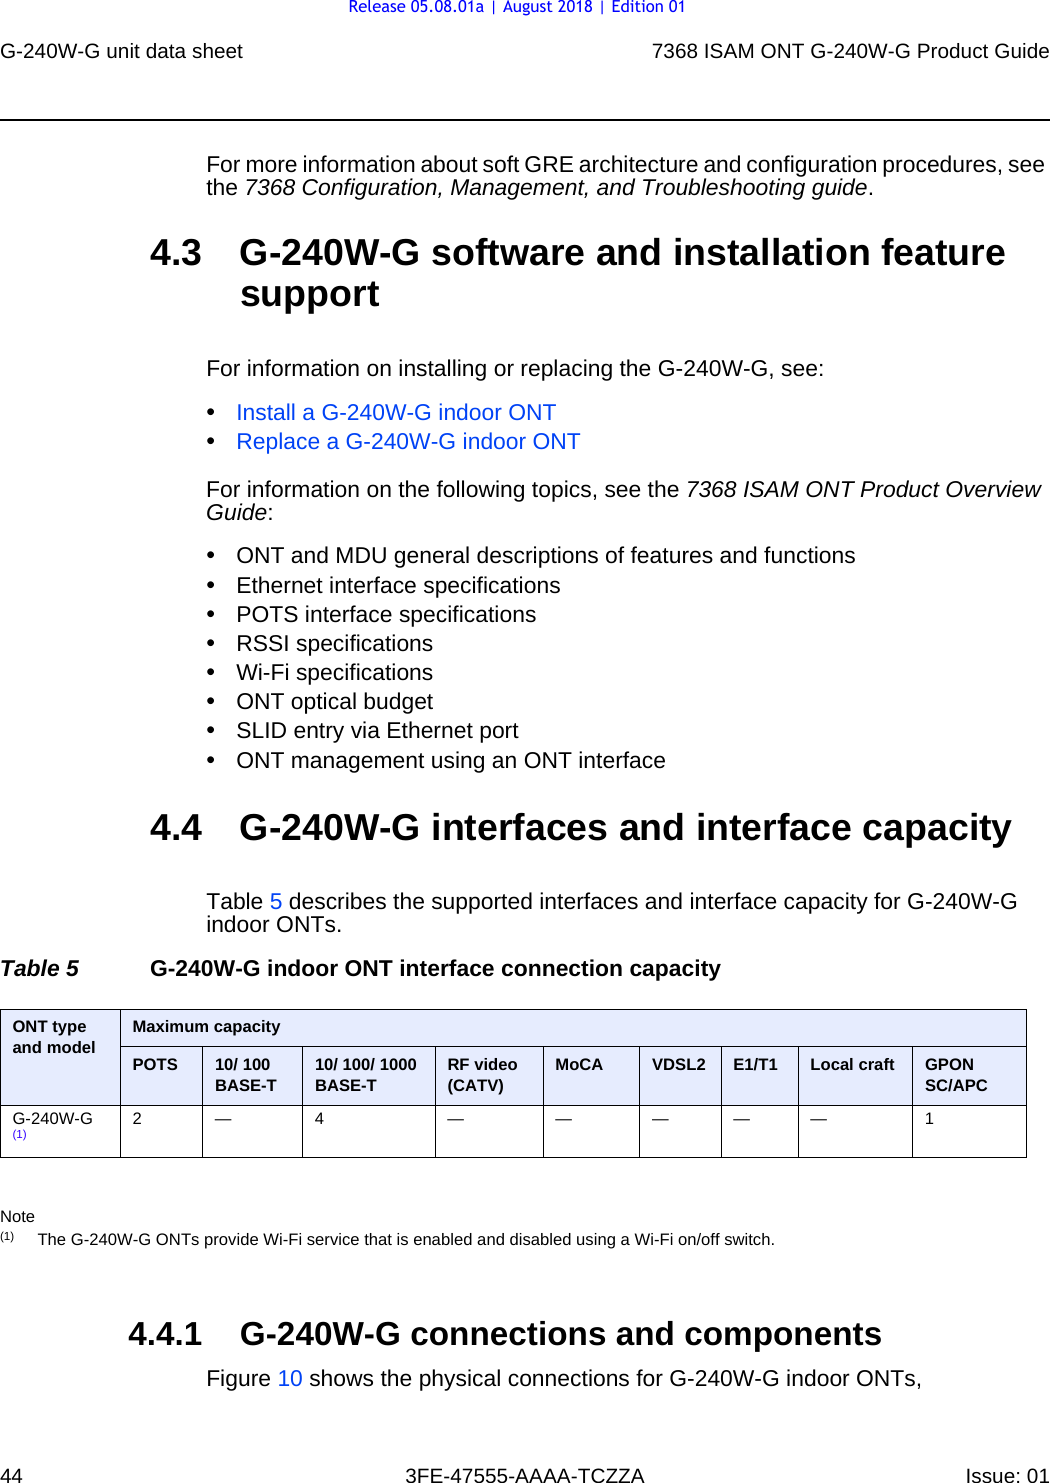 G-240W-G unit data sheet447368 ISAM ONT G-240W-G Product Guide3FE-47555-AAAA-TCZZA Issue: 01 For more information about soft GRE architecture and configuration procedures, see the 7368 Configuration, Management, and Troubleshooting guide. 4.3 G-240W-G software and installation feature supportFor information on installing or replacing the G-240W-G, see:•Install a G-240W-G indoor ONT•Replace a G-240W-G indoor ONTFor information on the following topics, see the 7368 ISAM ONT Product Overview Guide:•ONT and MDU general descriptions of features and functions•Ethernet interface specifications•POTS interface specifications•RSSI specifications•Wi-Fi specifications•ONT optical budget•SLID entry via Ethernet port•ONT management using an ONT interface4.4 G-240W-G interfaces and interface capacityTable 5 describes the supported interfaces and interface capacity for G-240W-G indoor ONTs.Table 5 G-240W-G indoor ONT interface connection capacityNote(1) The G-240W-G ONTs provide Wi-Fi service that is enabled and disabled using a Wi-Fi on/off switch.4.4.1 G-240W-G connections and componentsFigure 10 shows the physical connections for G-240W-G indoor ONTs, ONT type and model  Maximum capacityPOTS 10/ 100BASE-T 10/ 100/ 1000 BASE-T RF video (CATV) MoCA VDSL2 E1/T1 Local craft GPONSC/APCG-240W-G (1) 2— 4 — — ——— 1Release 05.08.01a | August 2018 | Edition 01